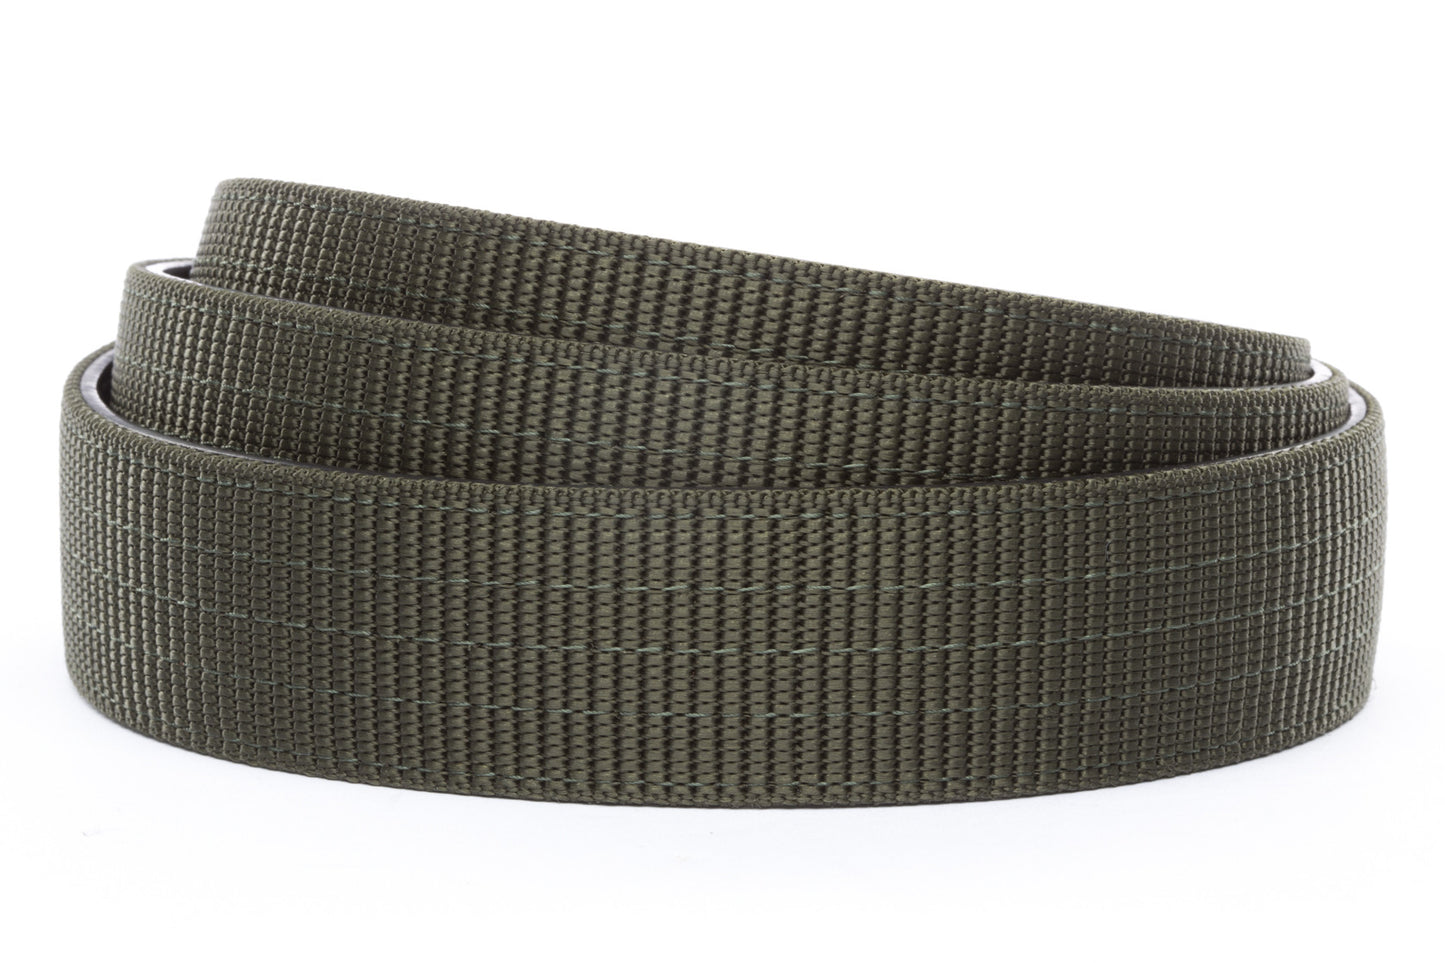 Men's nylon belt strap in olive drab, 1.5 inches wide, casual look